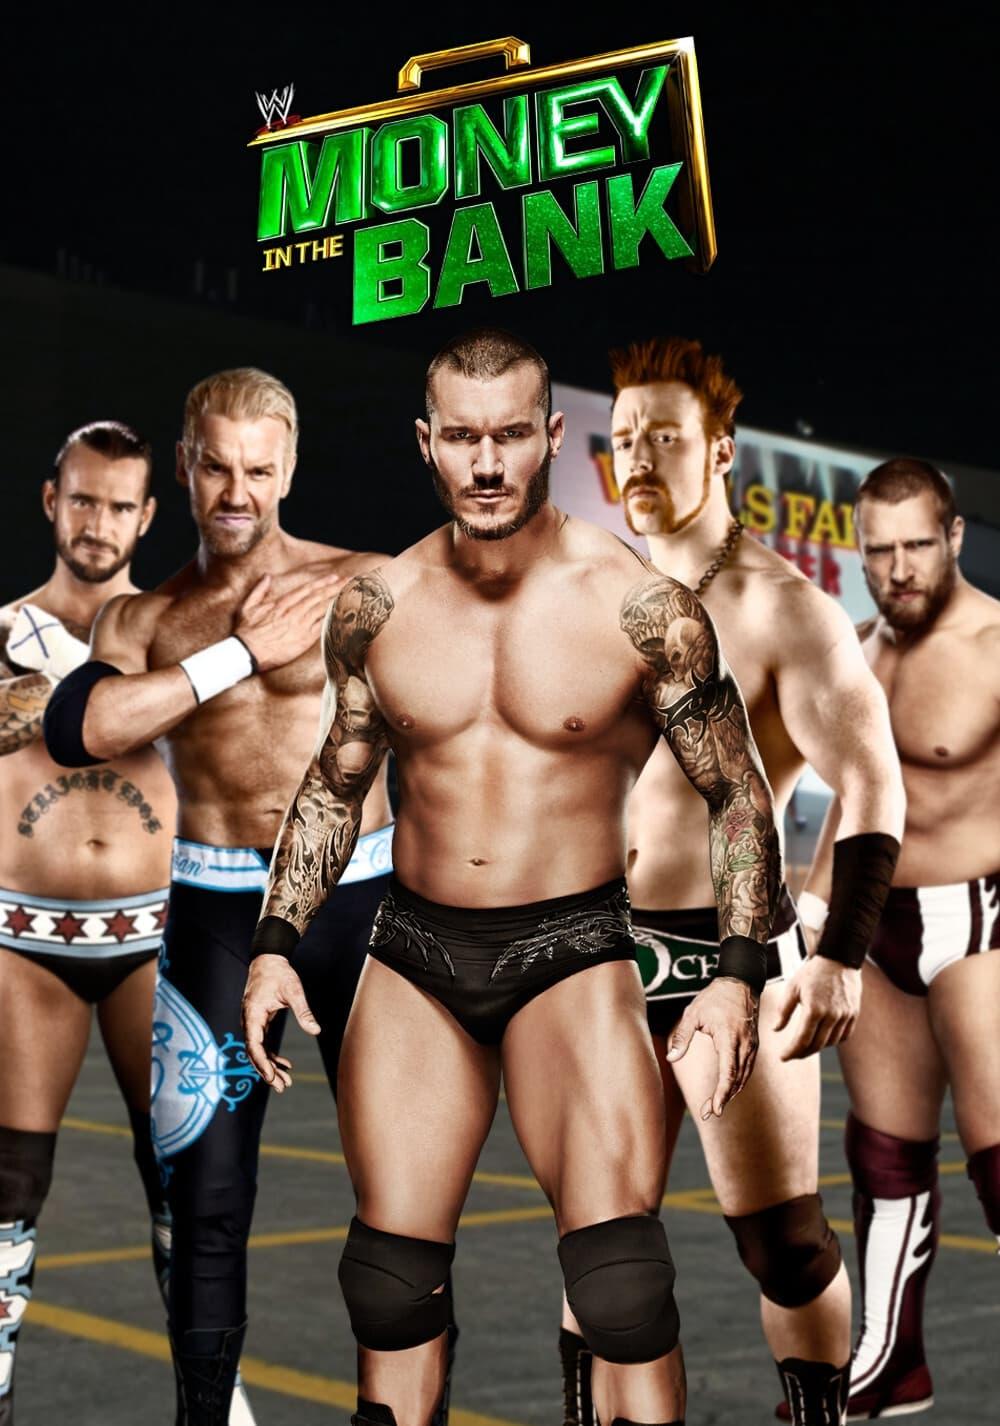 WWE Money in the Bank 2013 poster